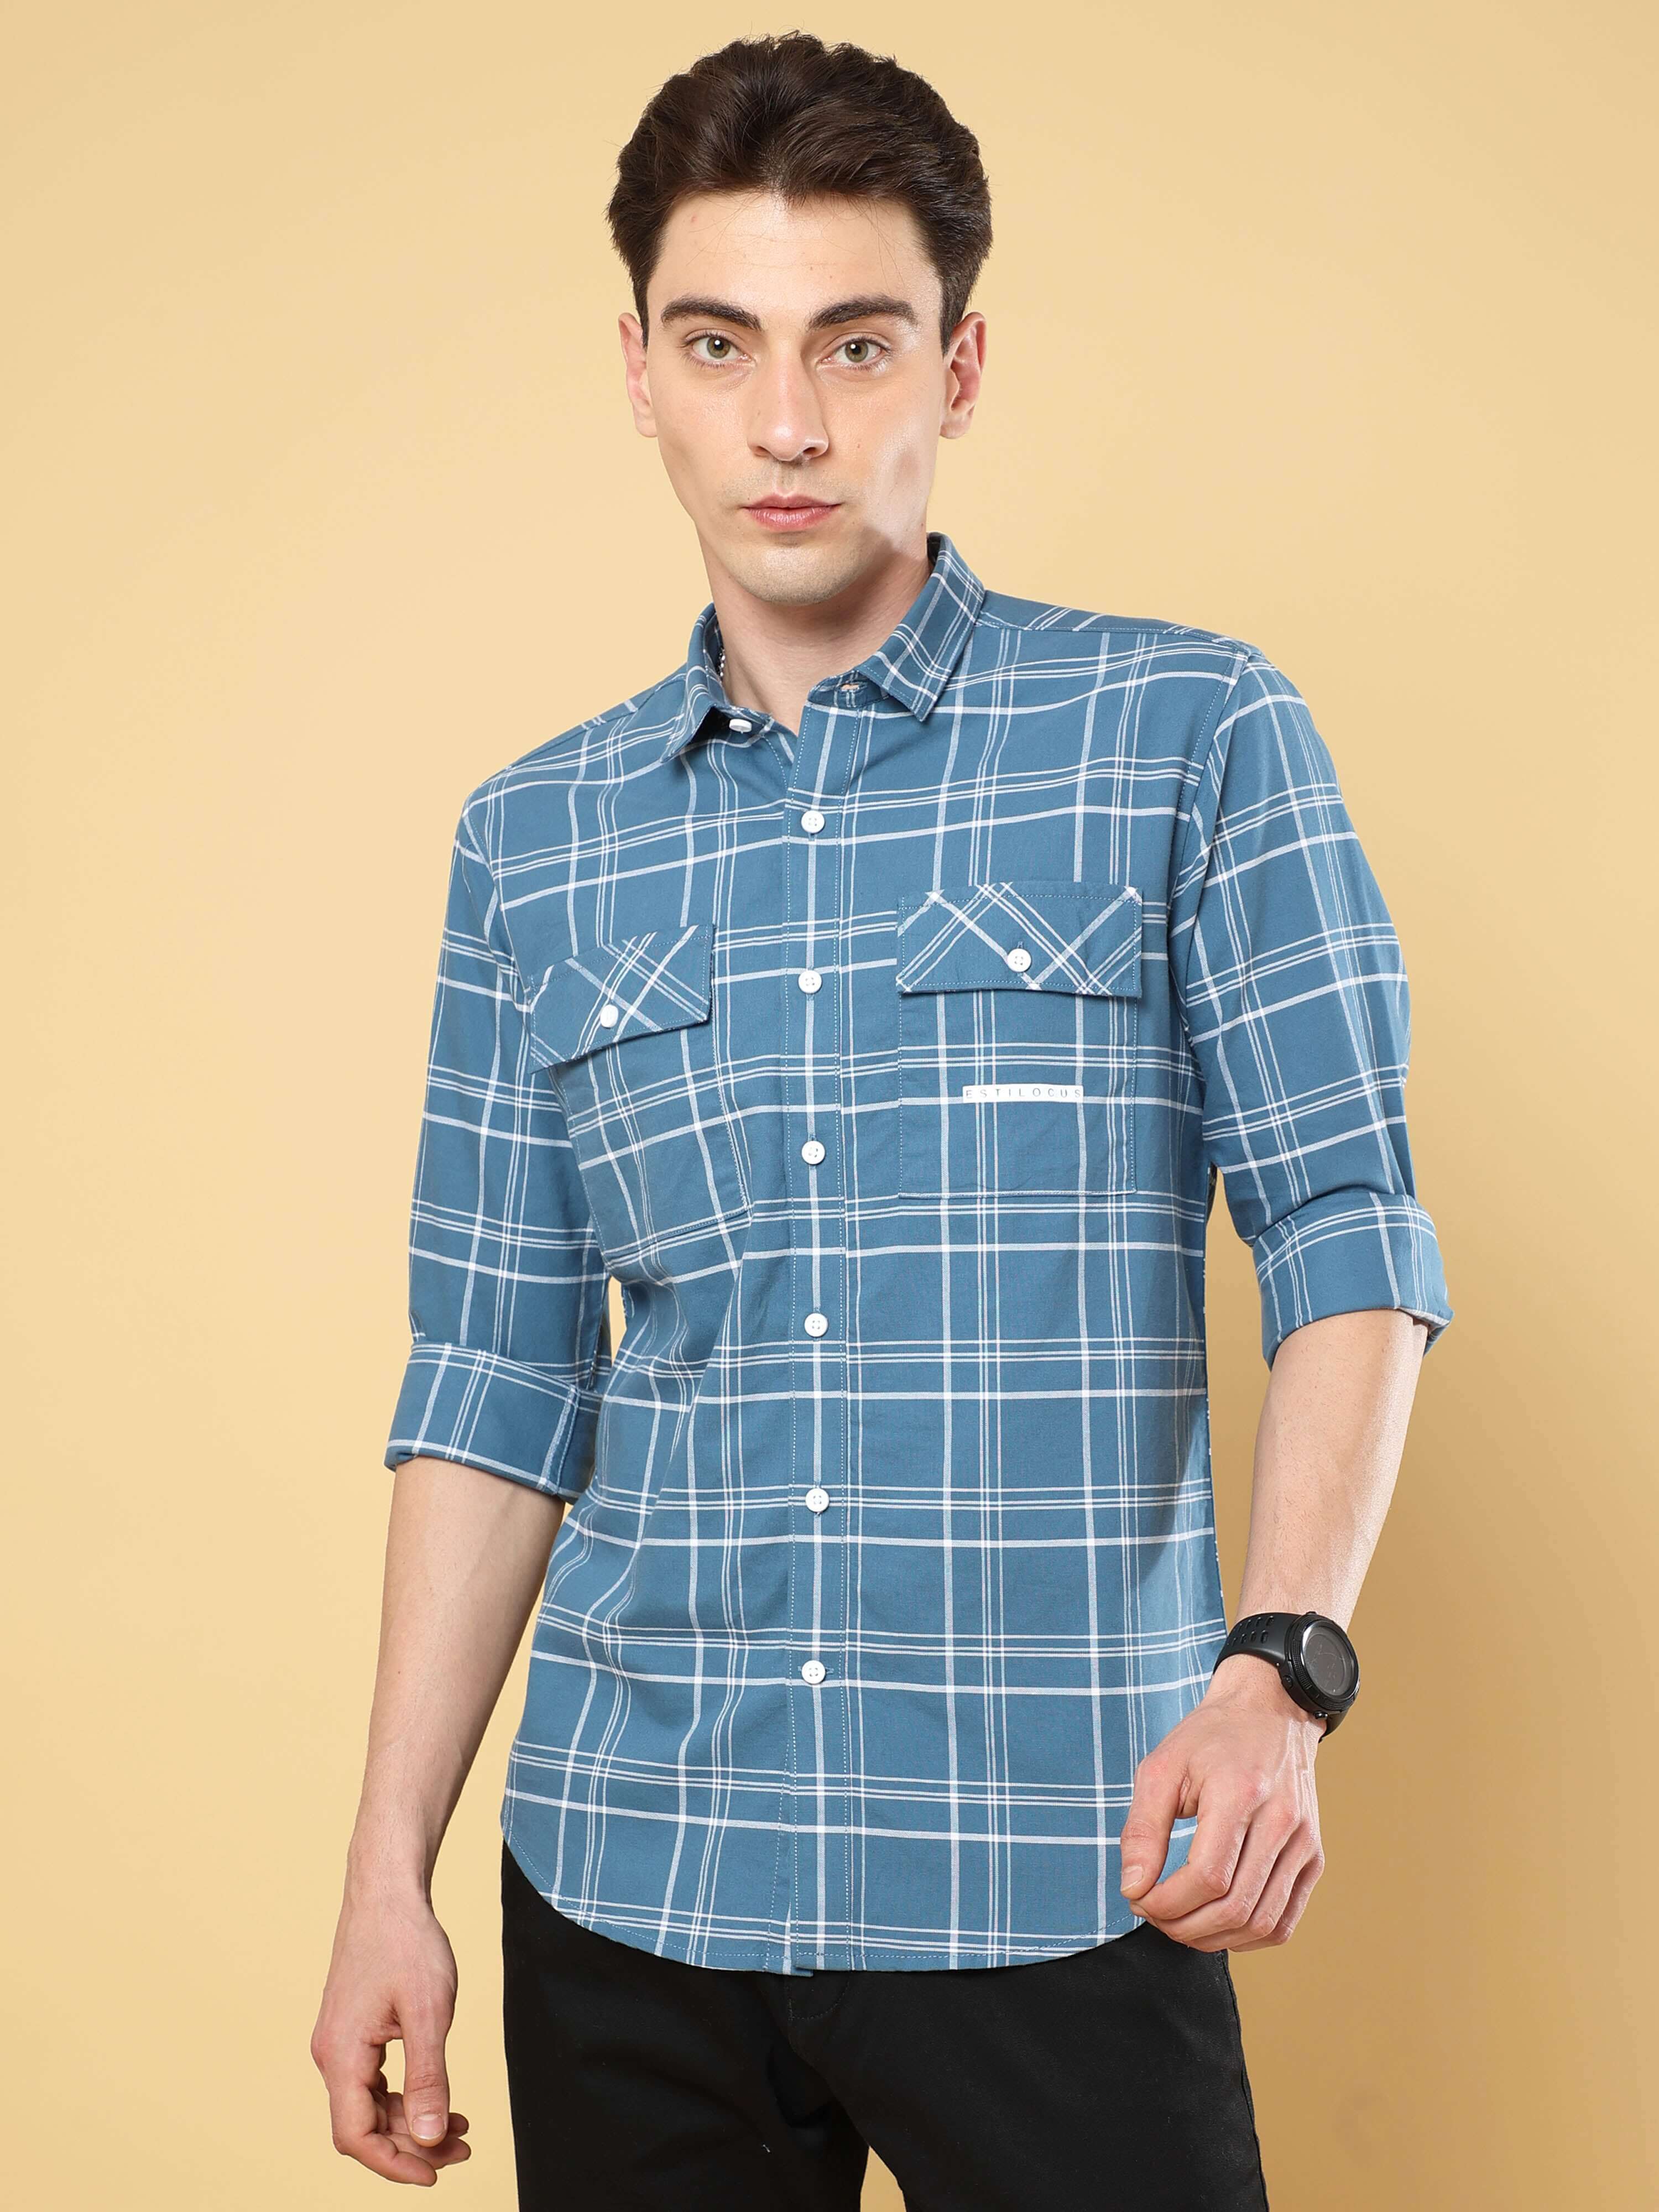 Steel Blue Cross Check Shirt shop online at Estilocus. • 100% premium cotton• Full-sleeve check shirt• Cut and sew placket• Regular collar• Double button round cuff's.• Double pocket with flap• Curved hemline• All single needle construction, Finest qualit